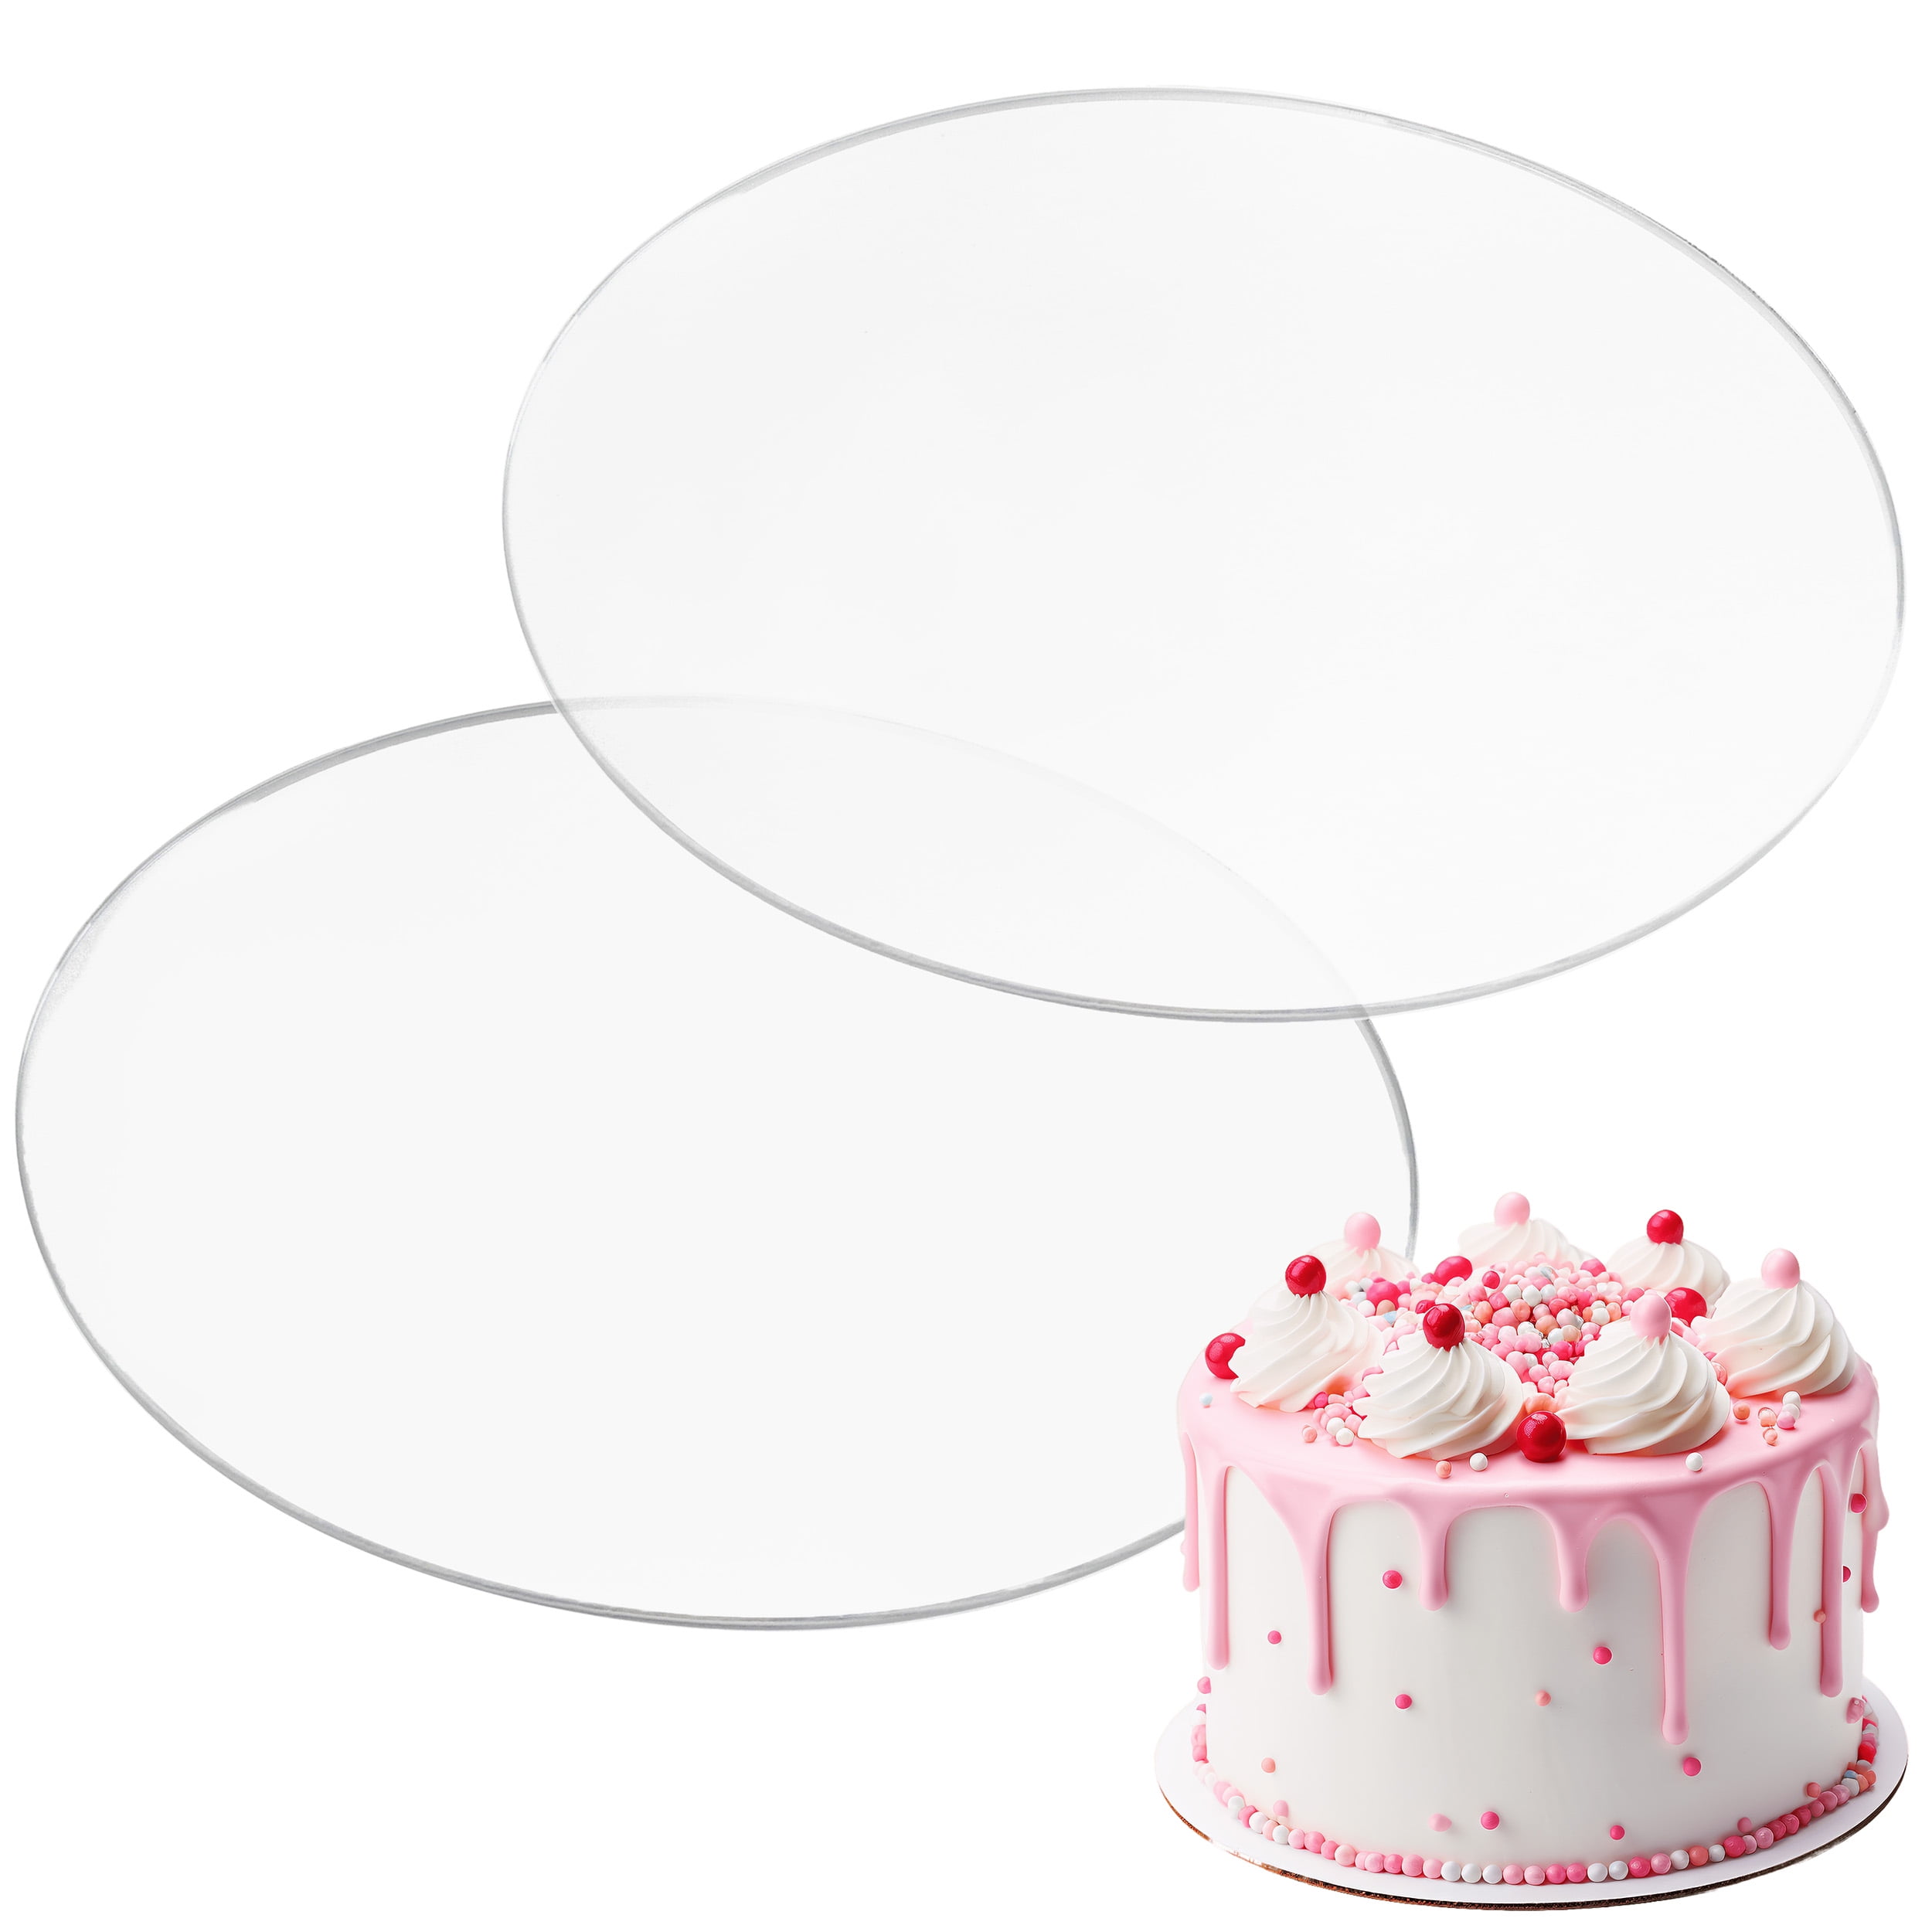 CAKESAFE Essential Cake Decorating Acrylic Disk Kit - 3 Sets - Round 6.0,  8.0, 10.0 Disk Sets (2 disks per size), 2-8 Icing Scrapers with 1